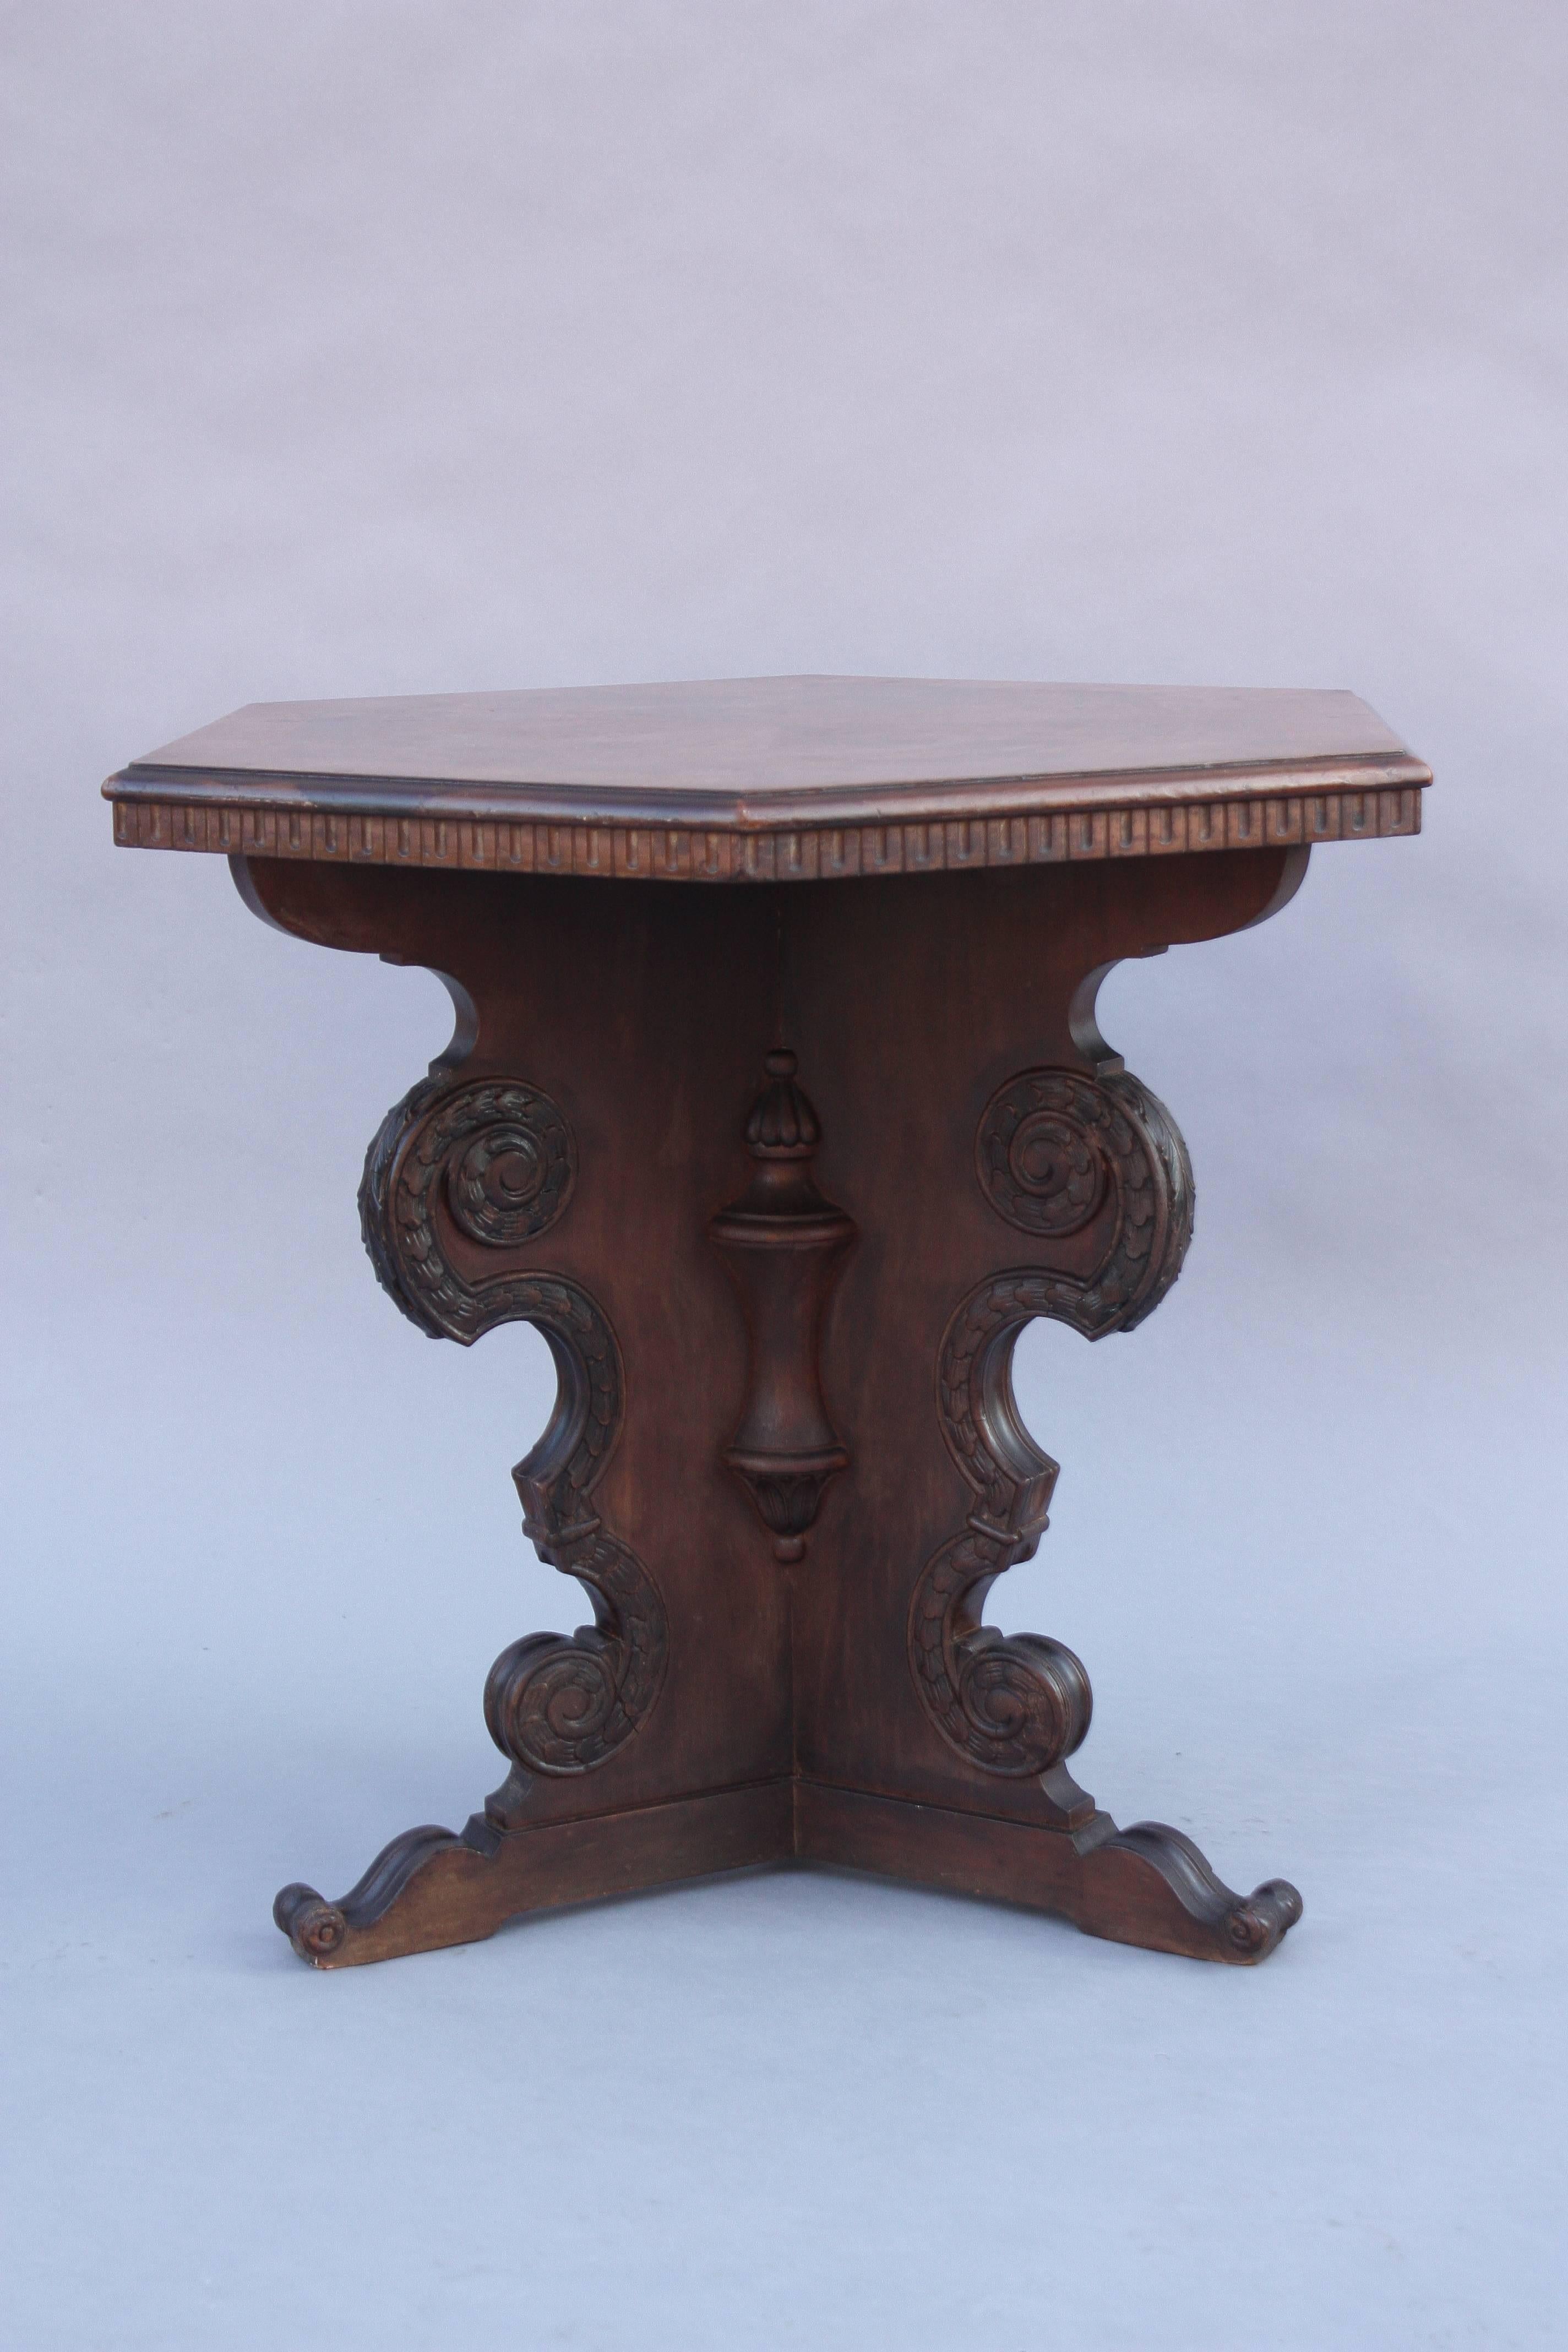 American 1920s Hexagonal Walnut Table with Pedestal Base